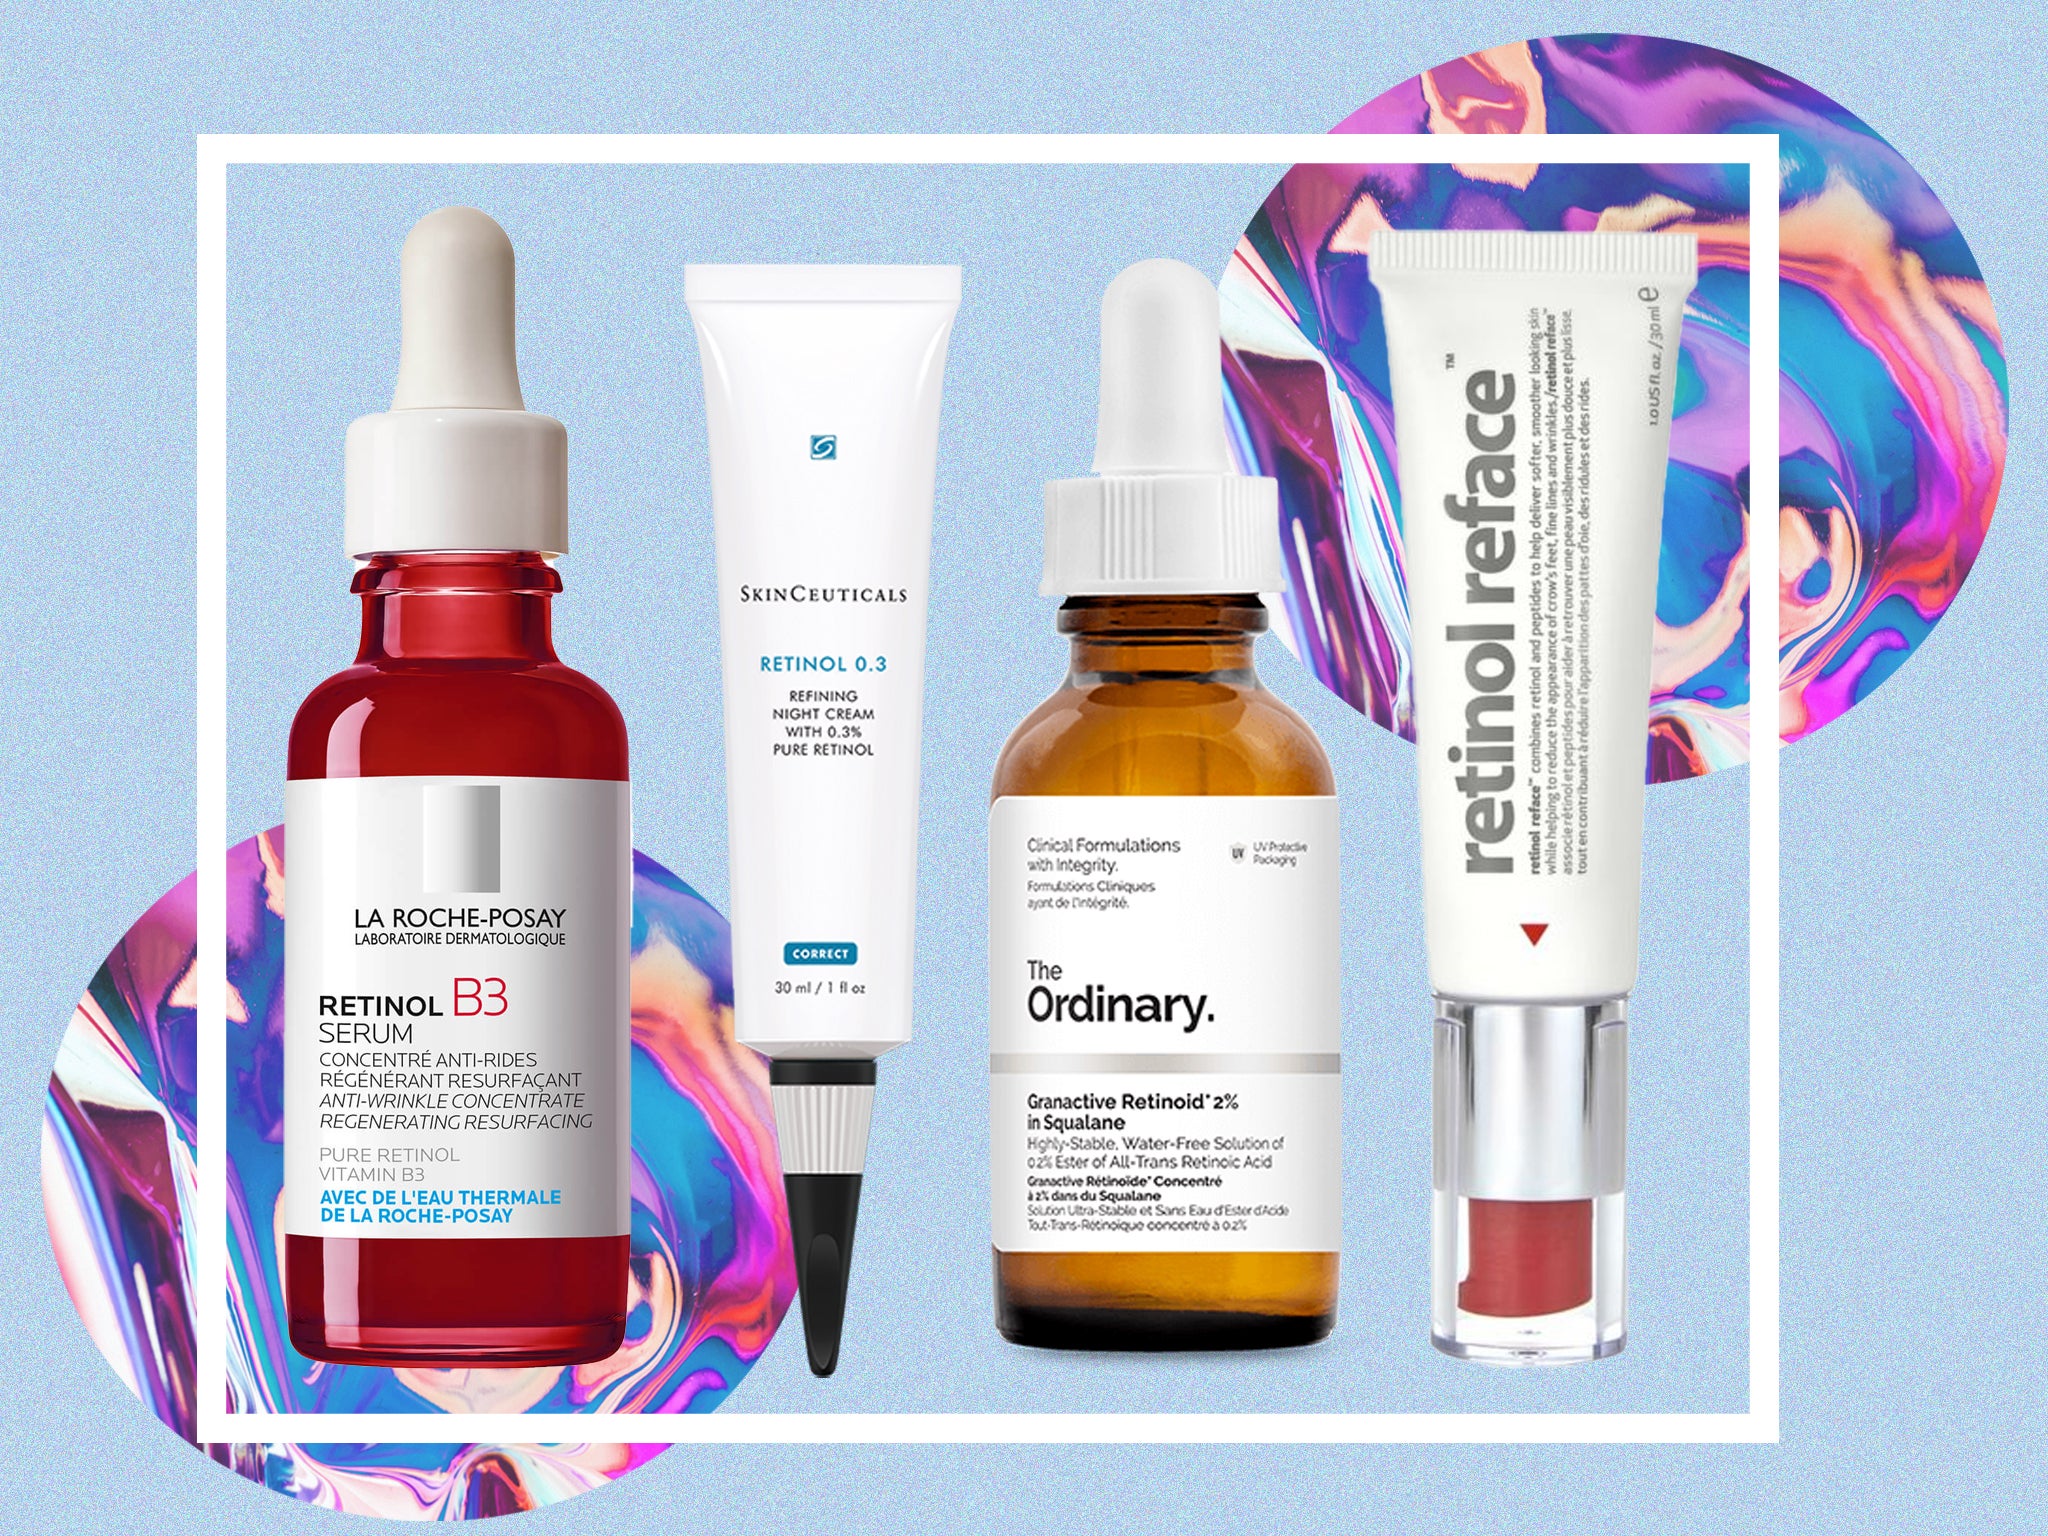 Top 10 Retinol Products The Complete Guide Drugstore Retinol A Edit